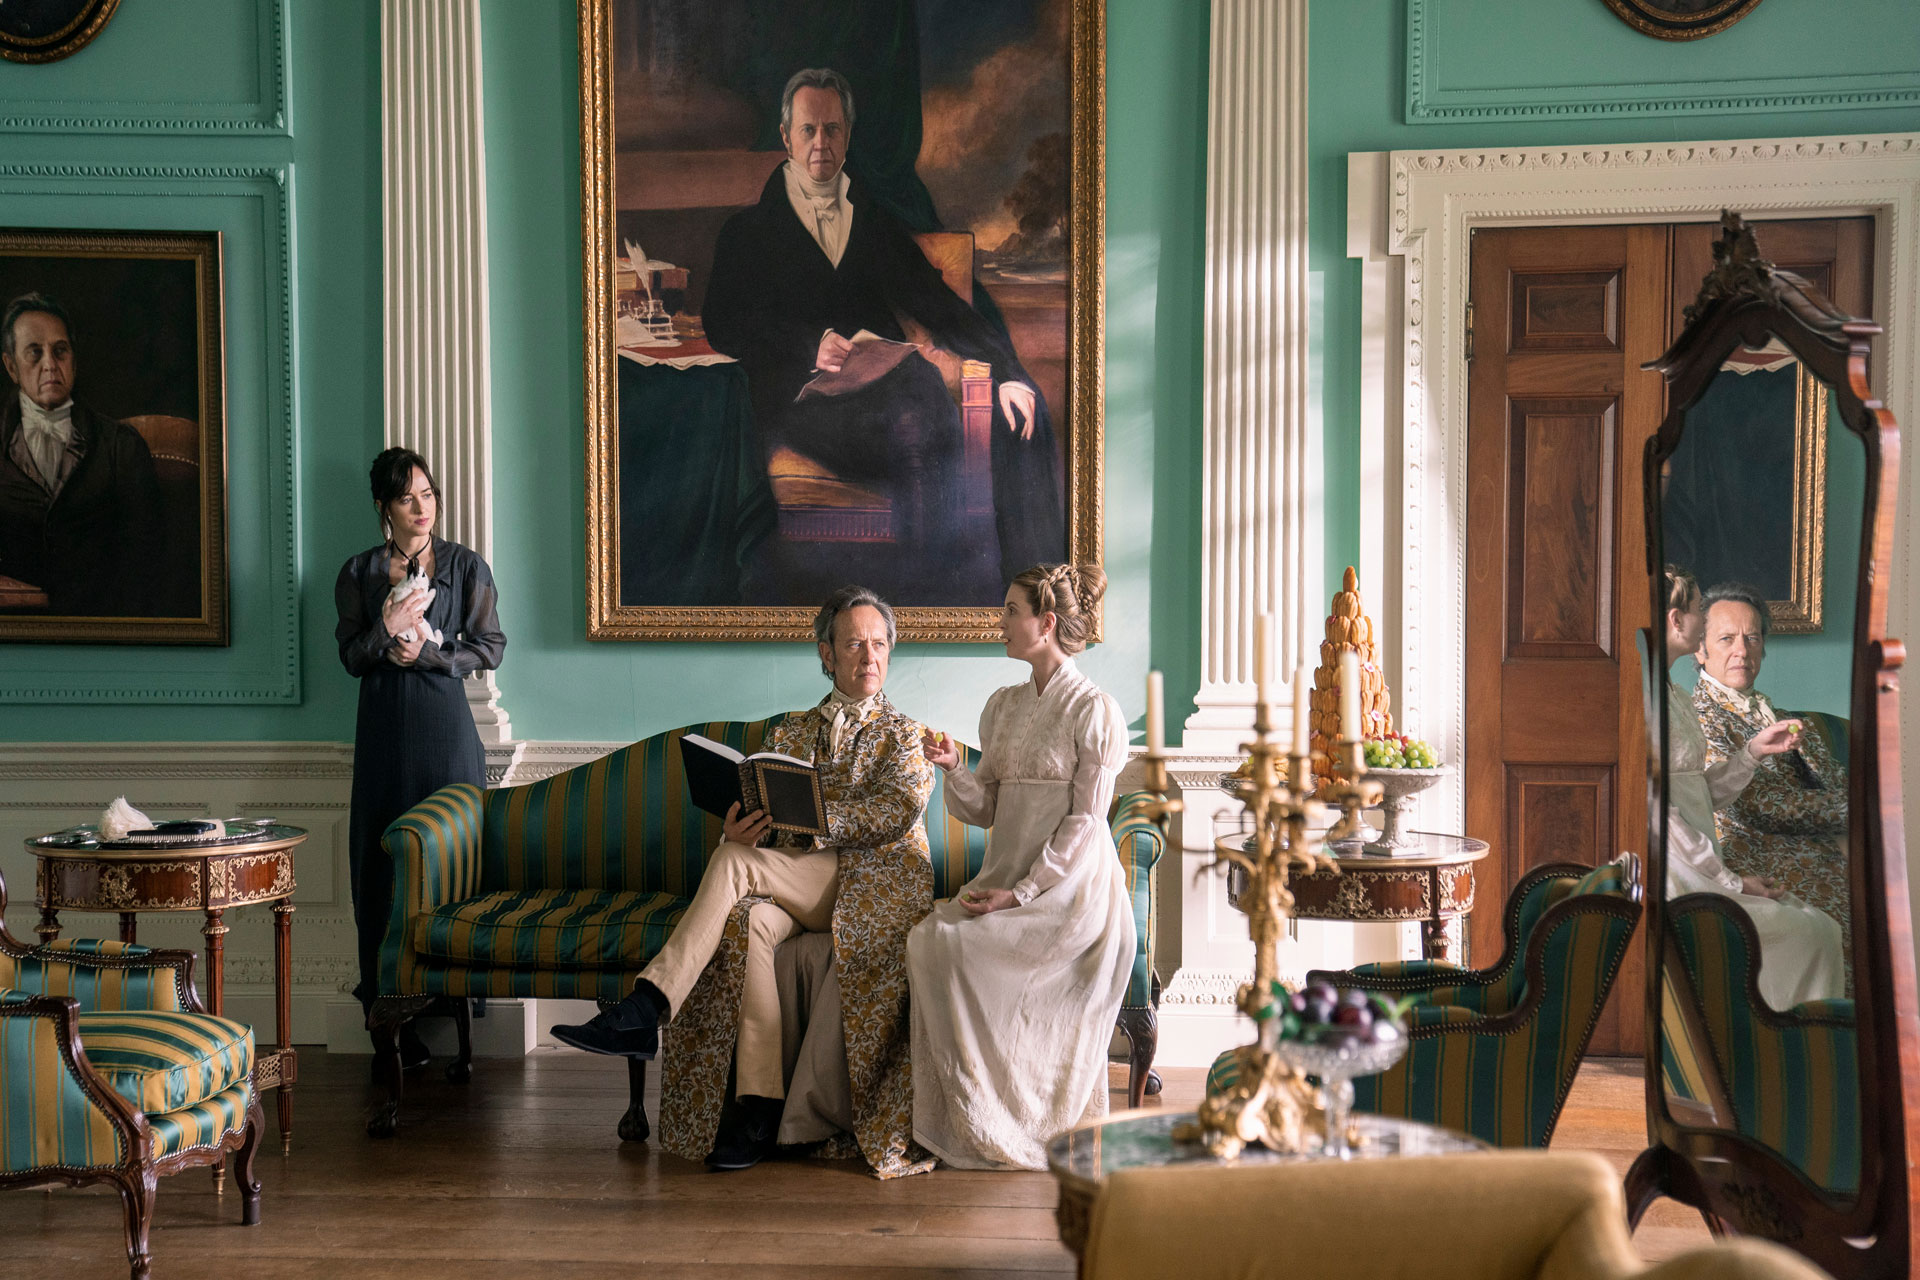 The interiors of the fictional Kellynch Hall in Jane Austen's Persuasion. The Netflix Adaptation